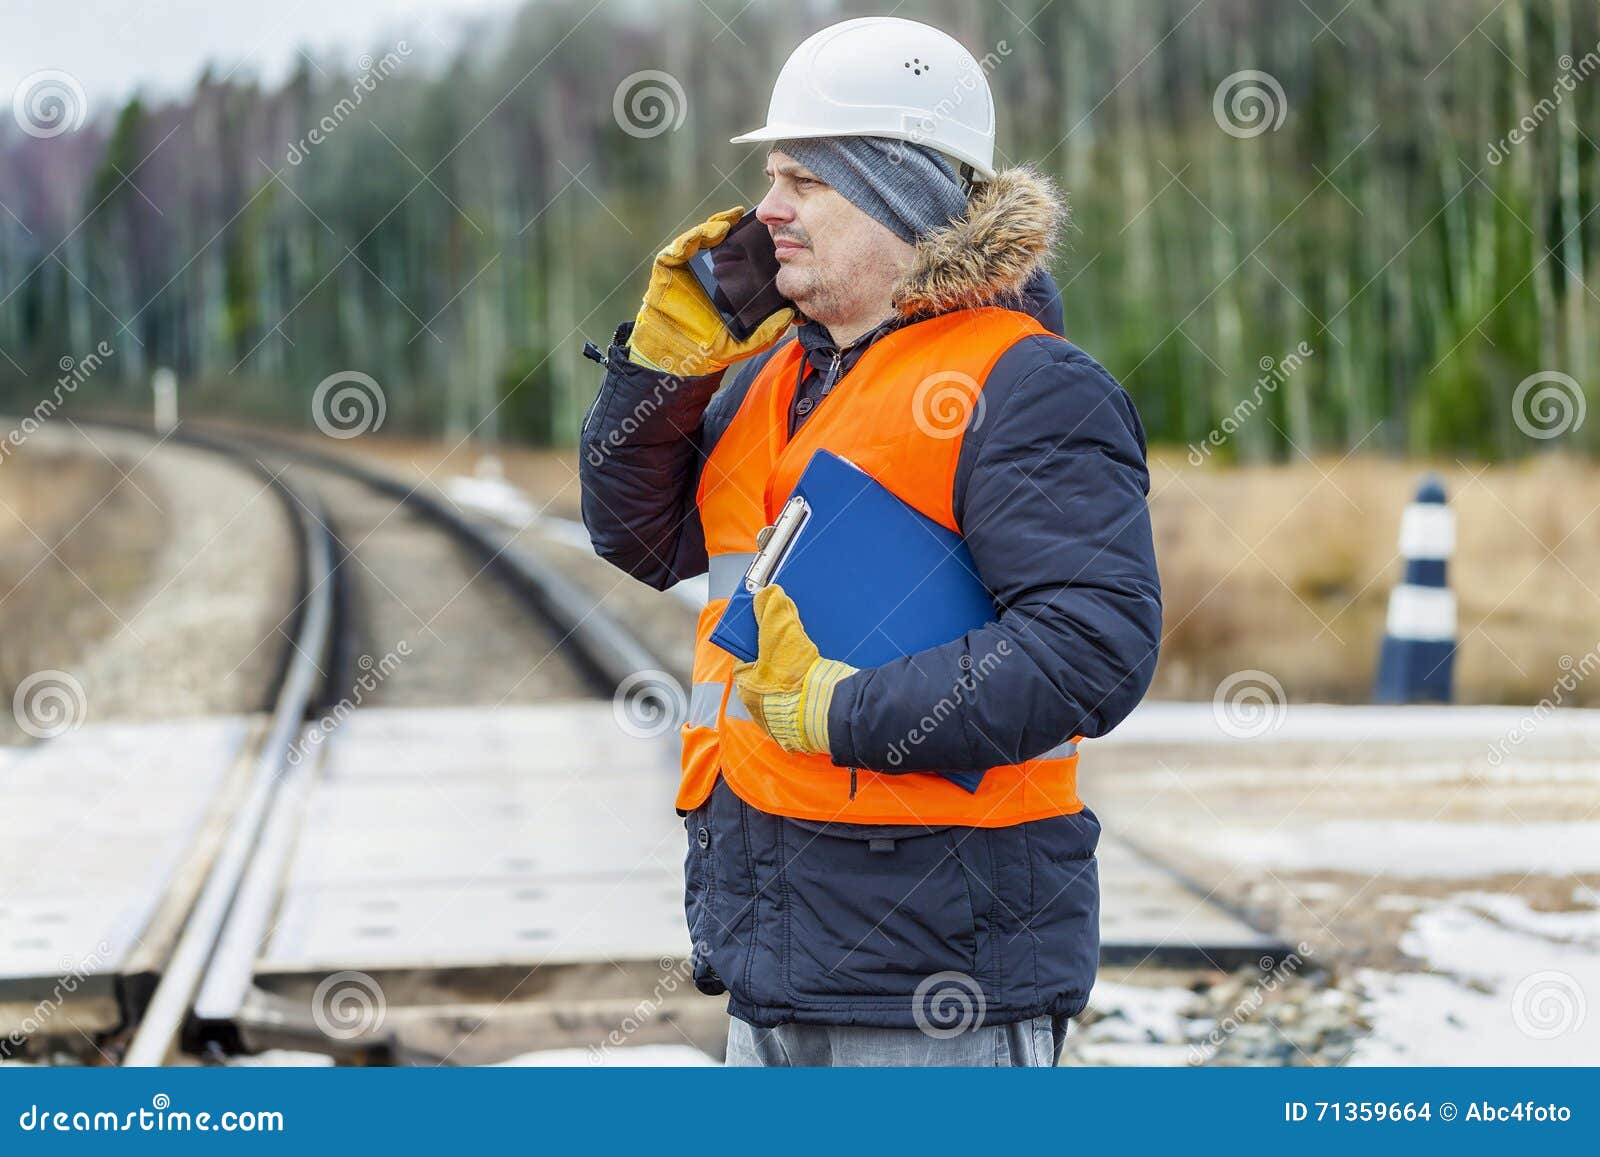 railroad worker with documentation and smartp hone on railway crossing